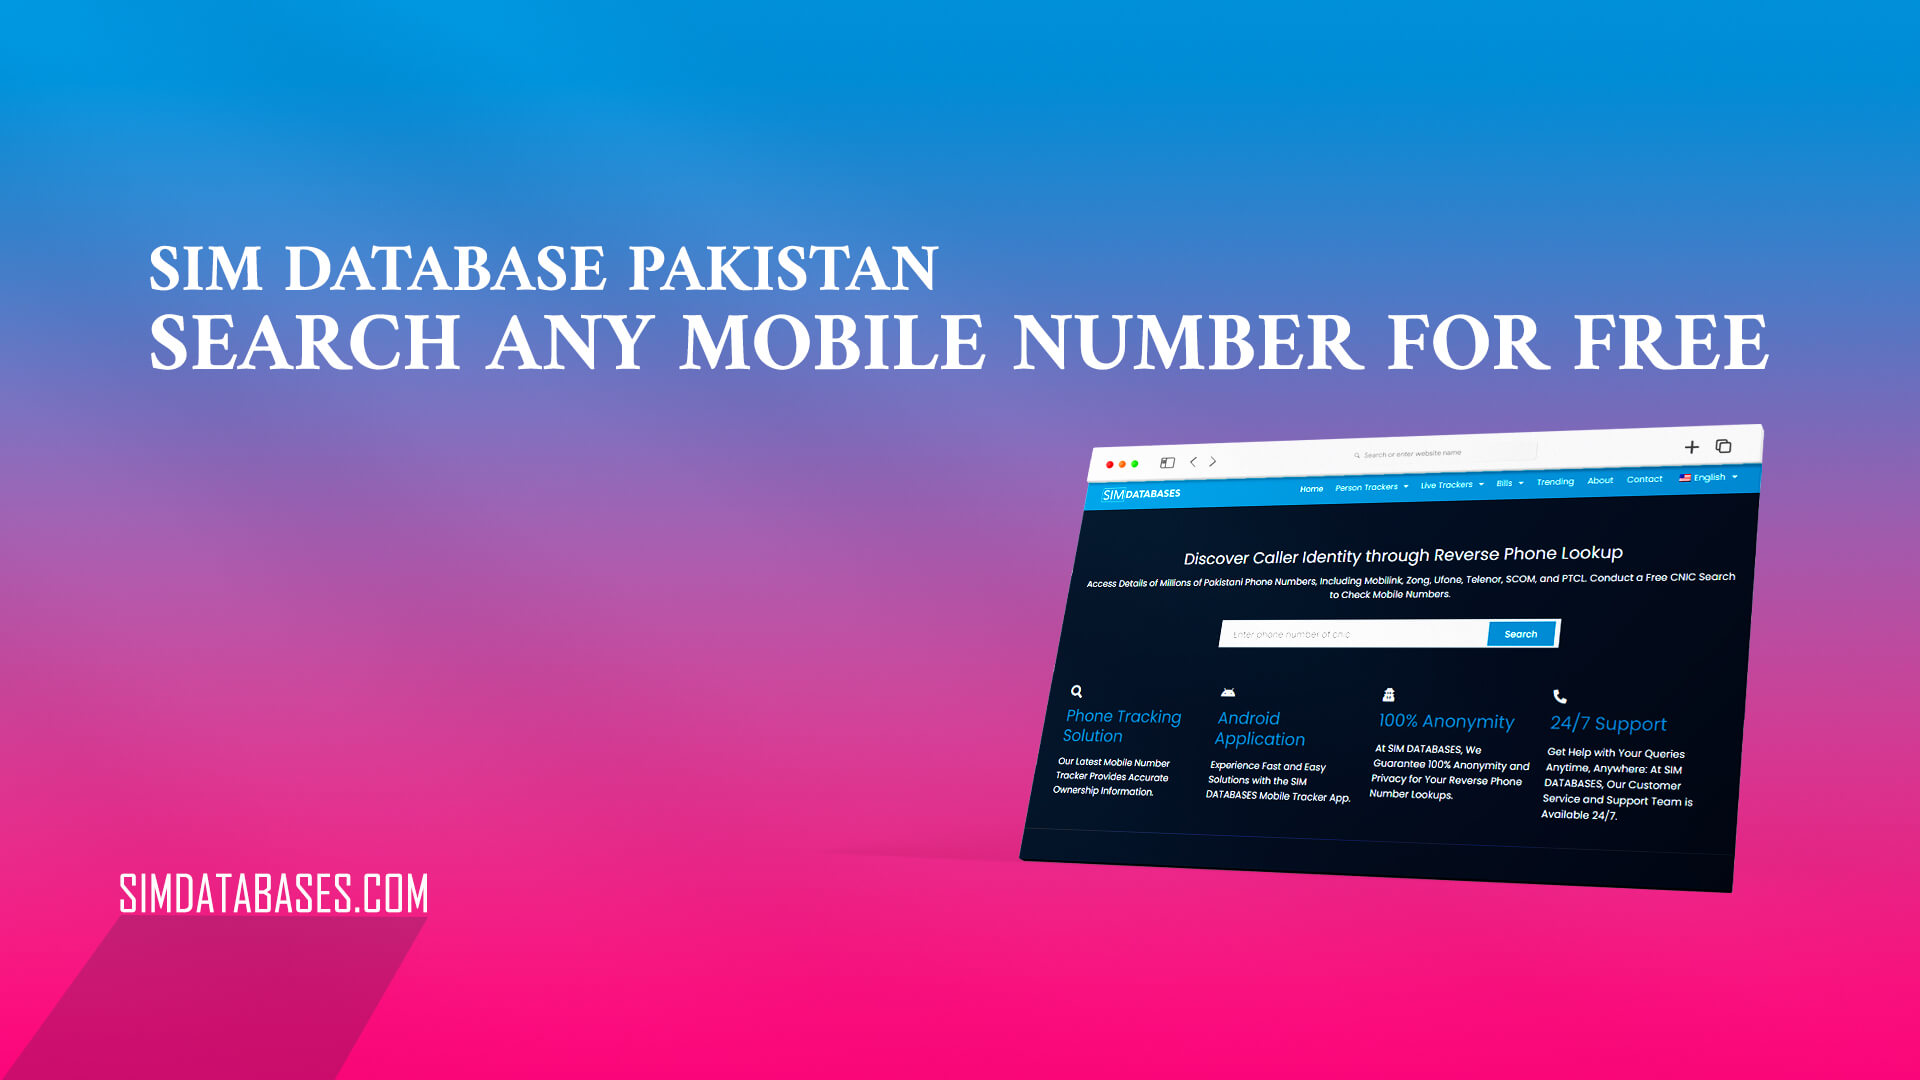 SIM Database Pakistan Search Any Mobile Number for free